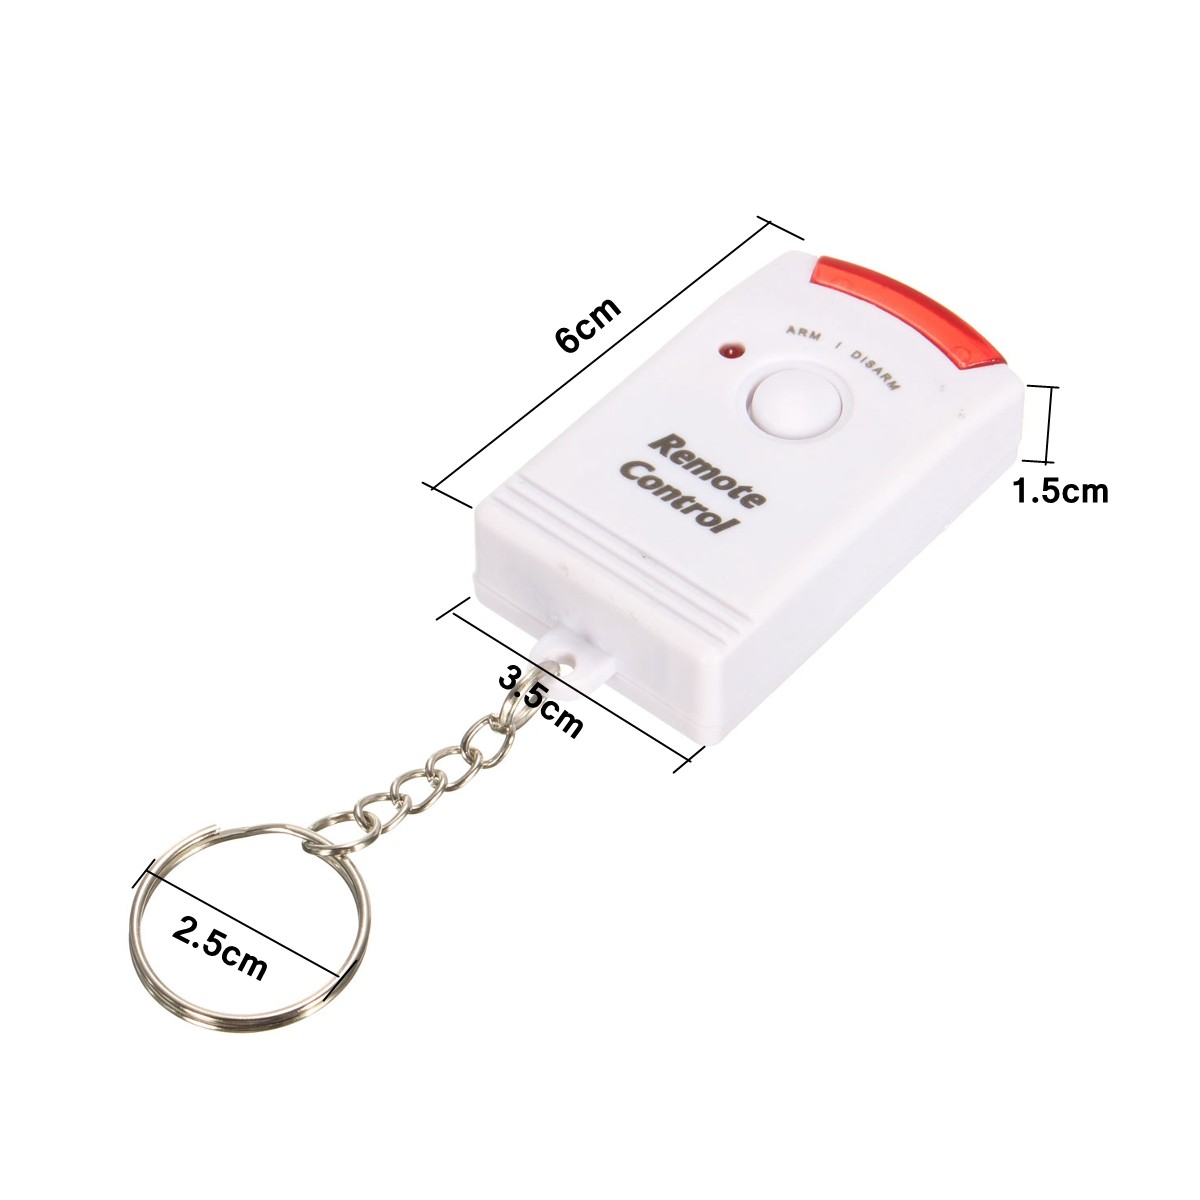 2-In-1-Motion-Wireless-Infrared-Security-Alarm-Chime-Alarm-Home-Detector-with-Remote-ControlHolder-1031195